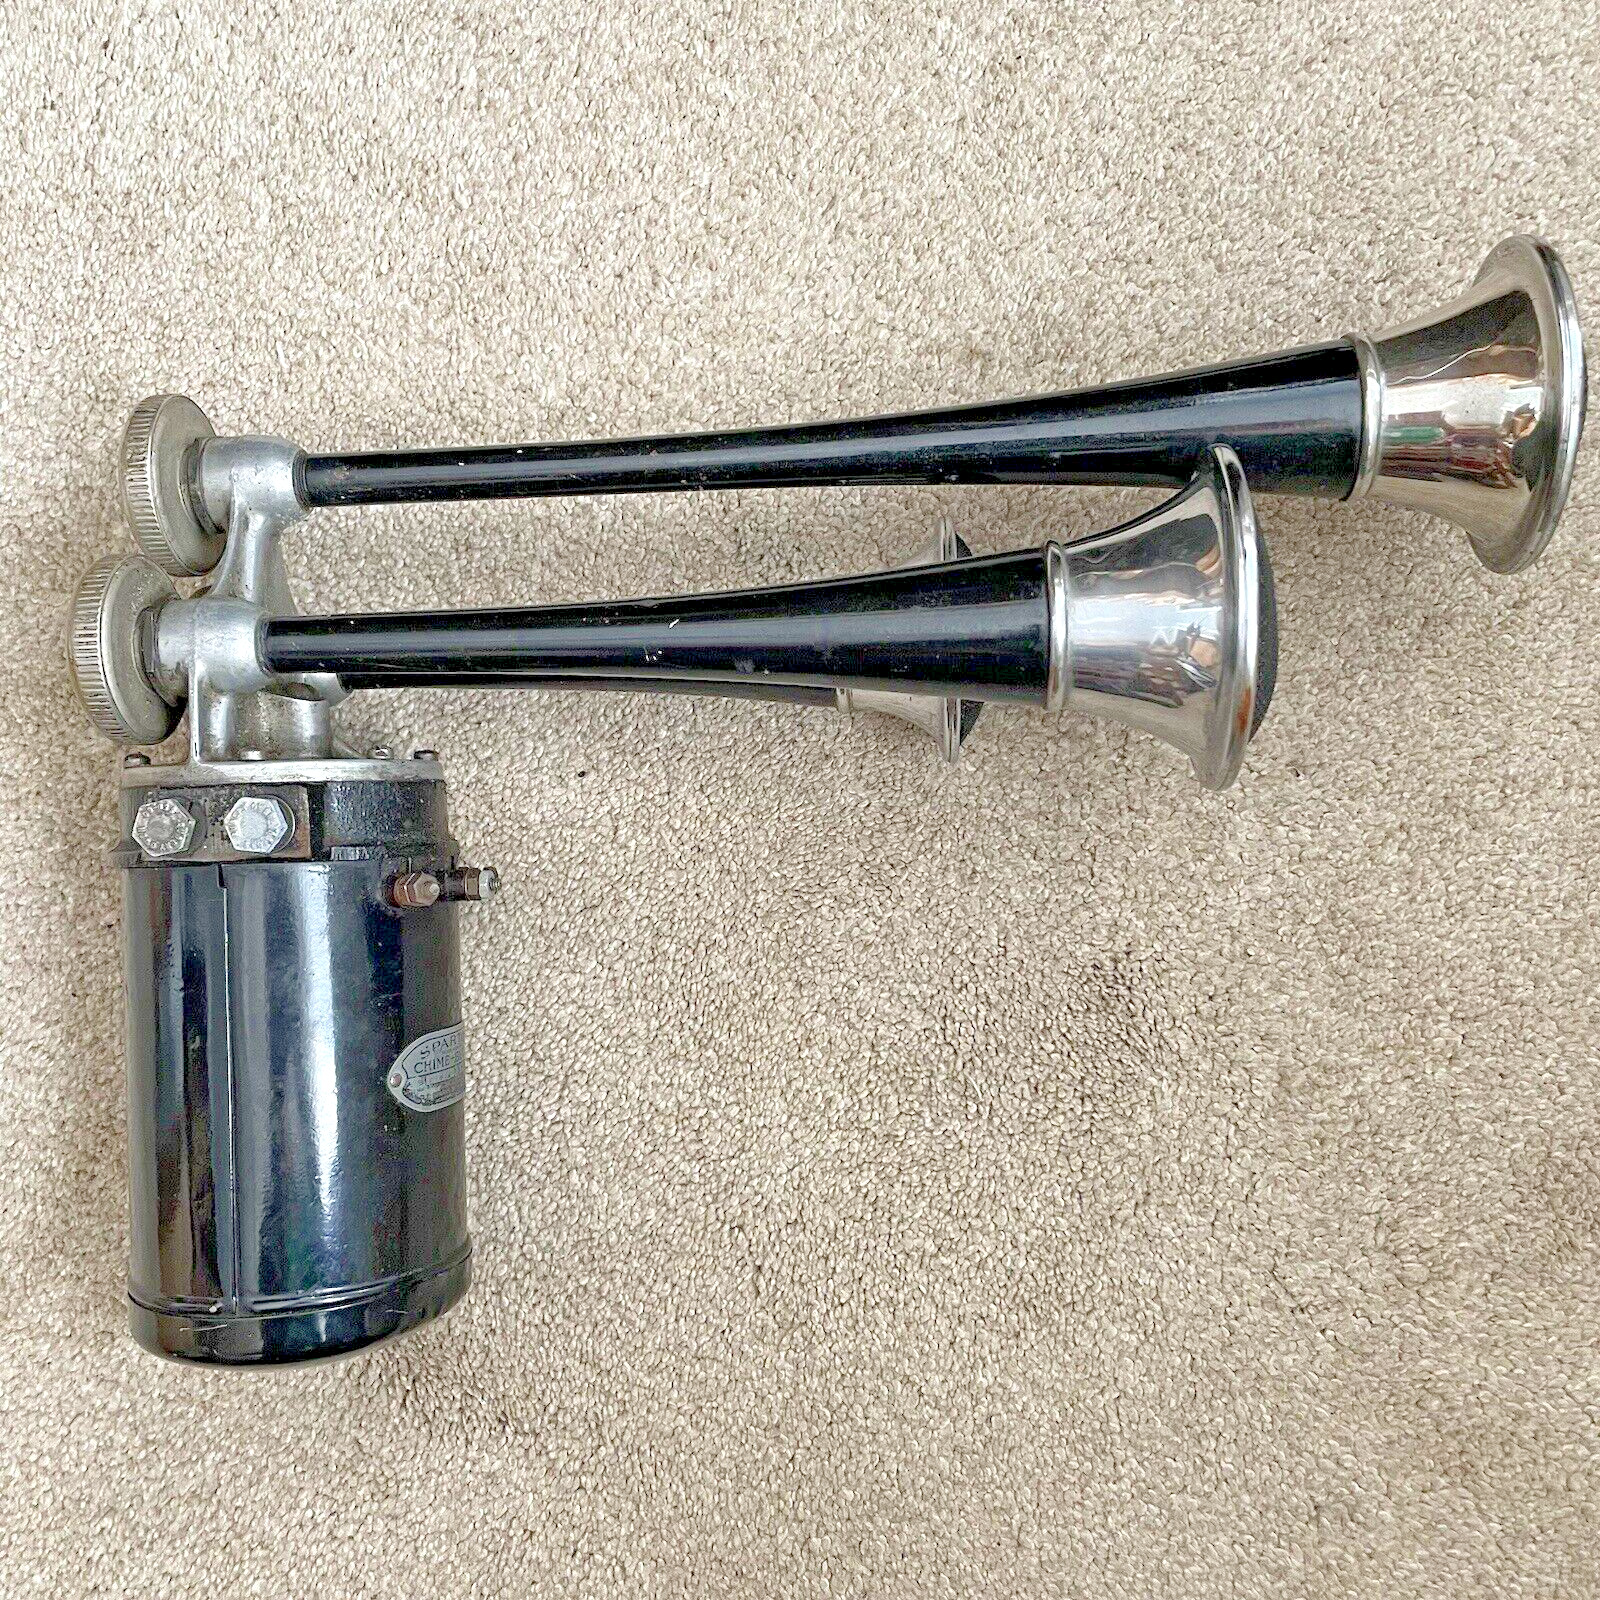 Sparton Chime-Bugle 6-1934, Triple Tone, 3 Air Horn, Vintage 1930s, Motor Works